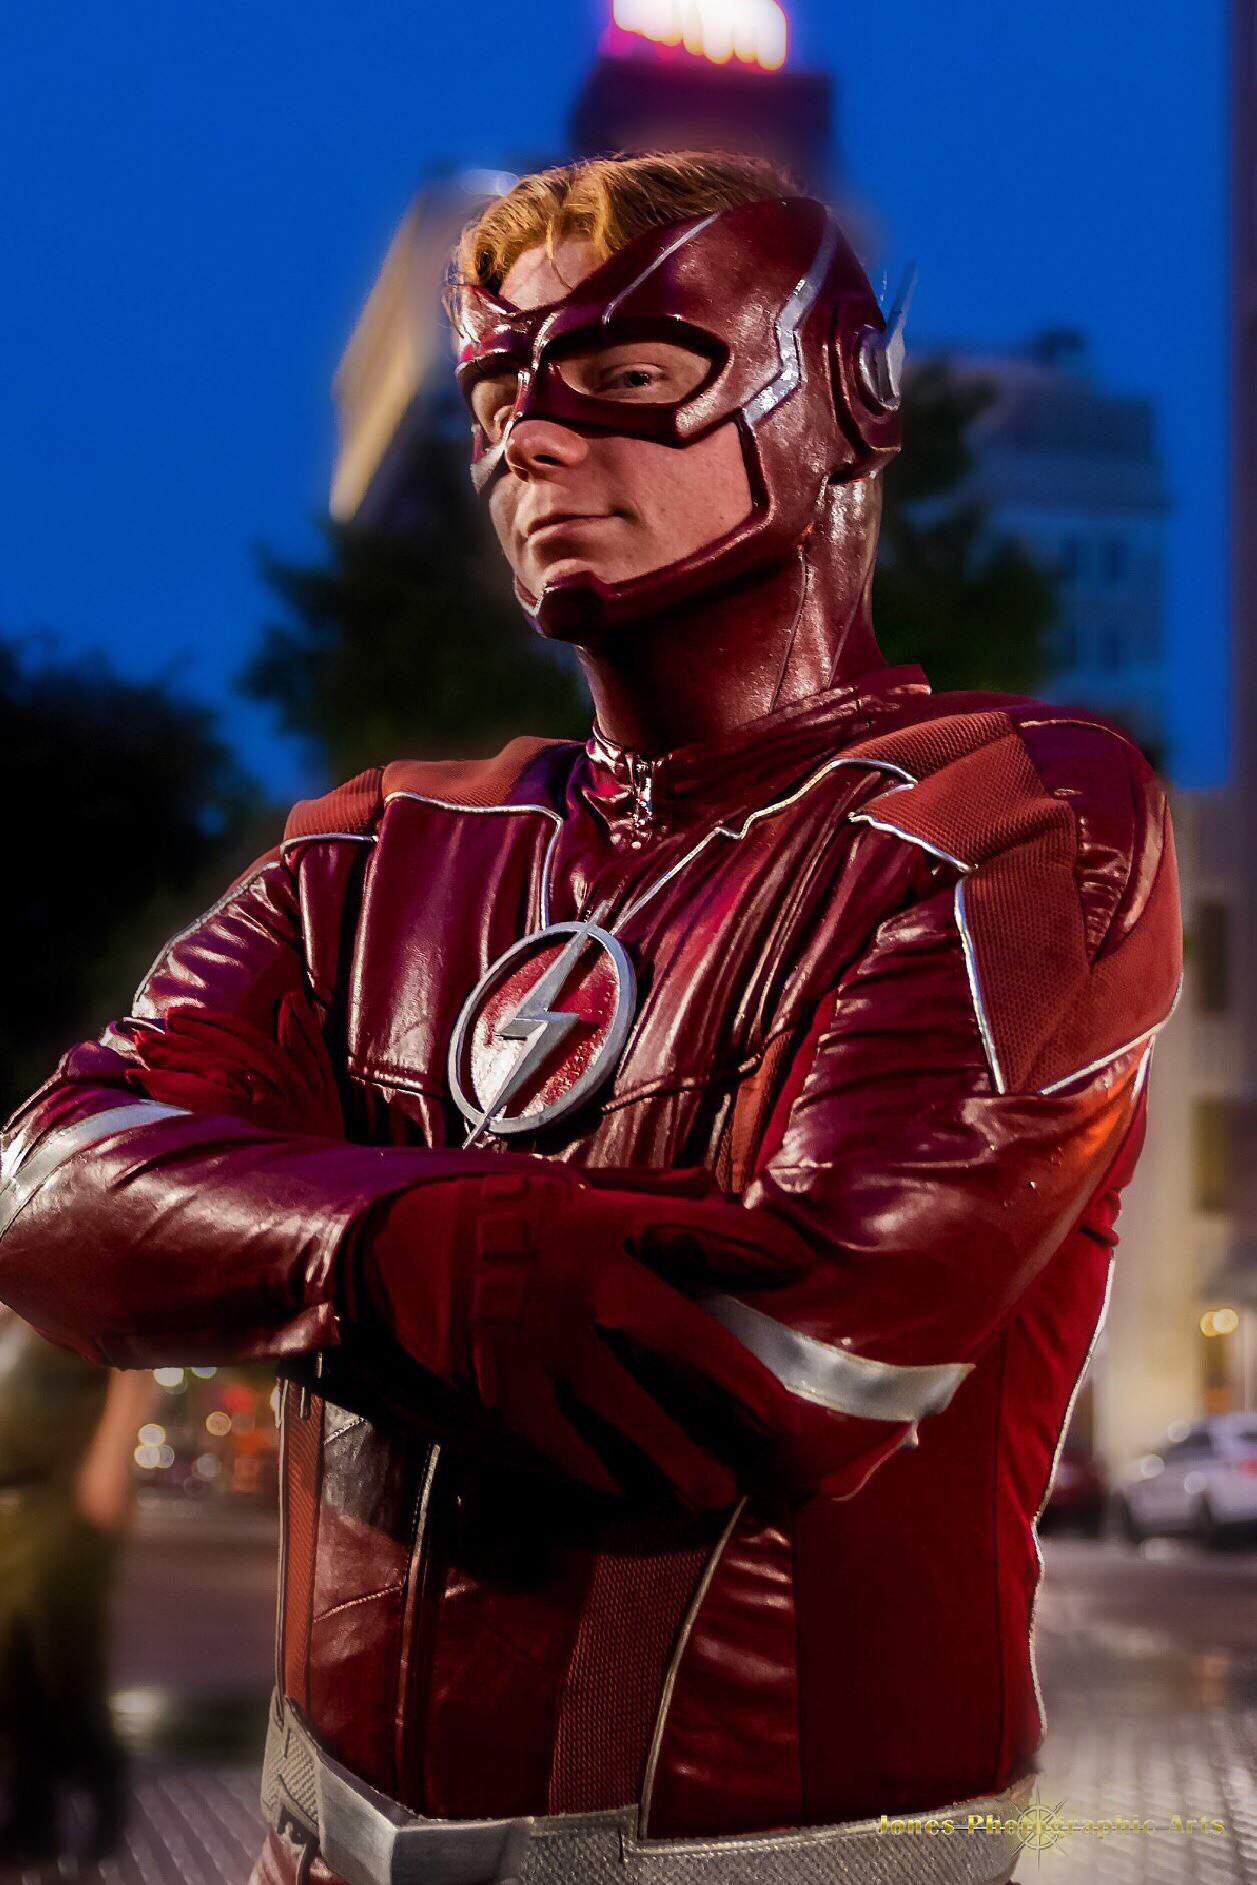 wally from the flash